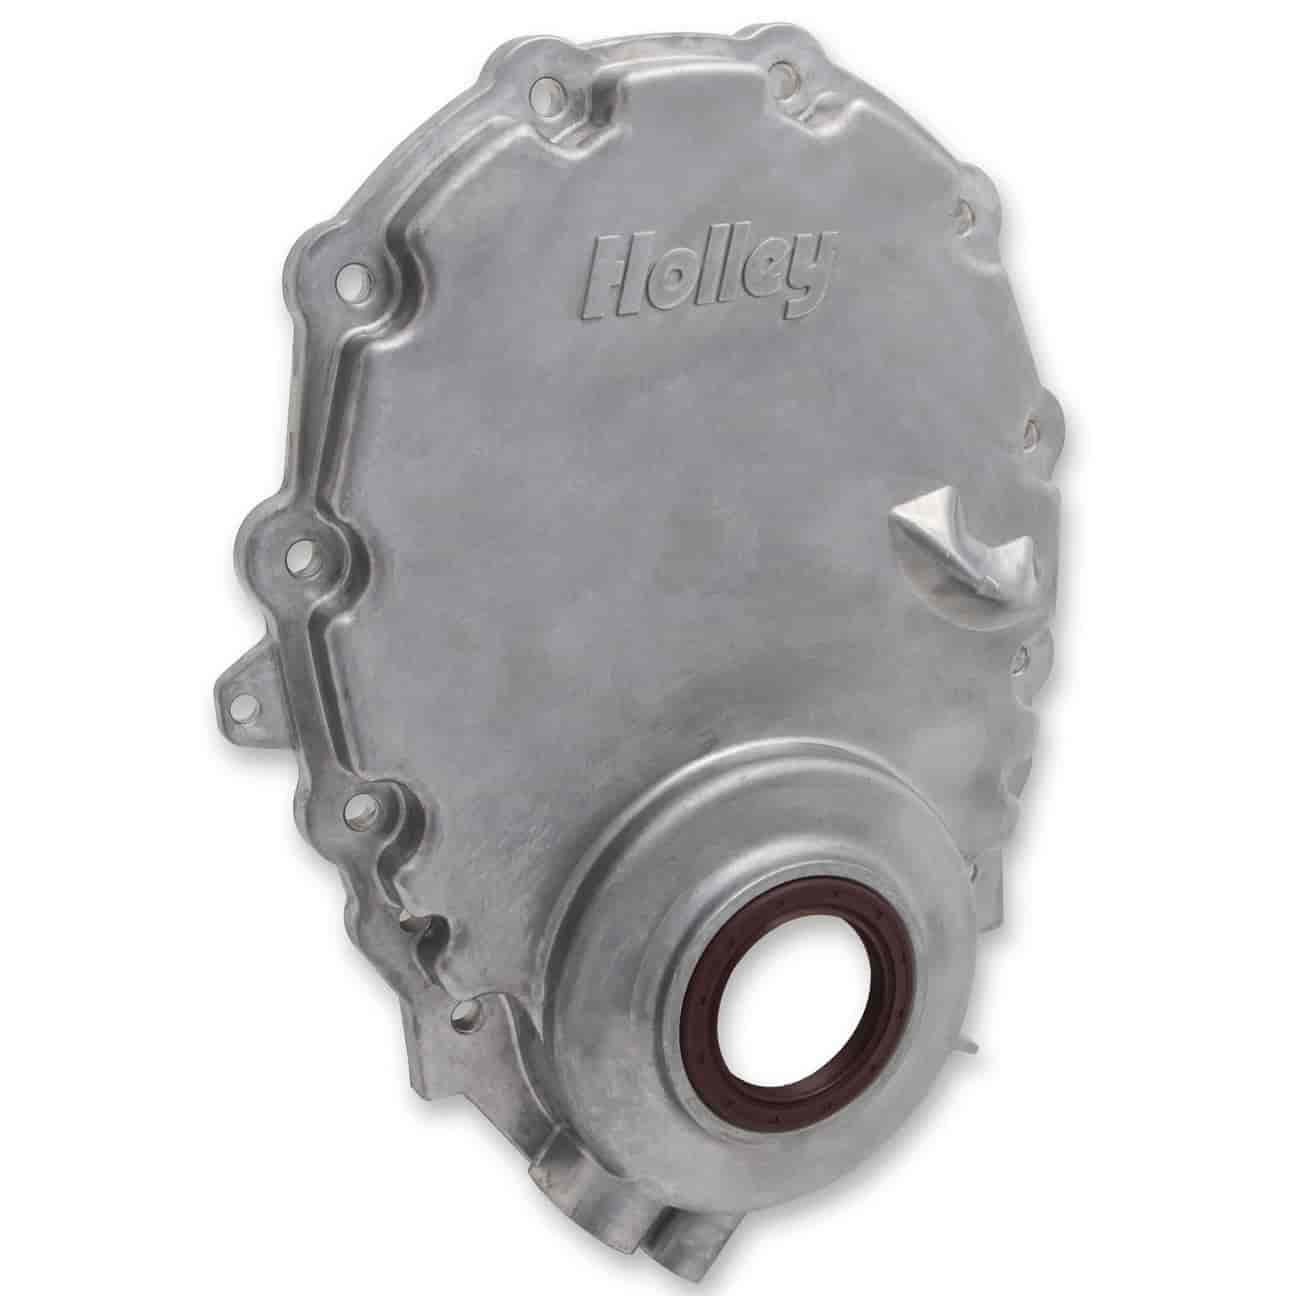 Holley 21-150 Timing Chain Cover 1996 